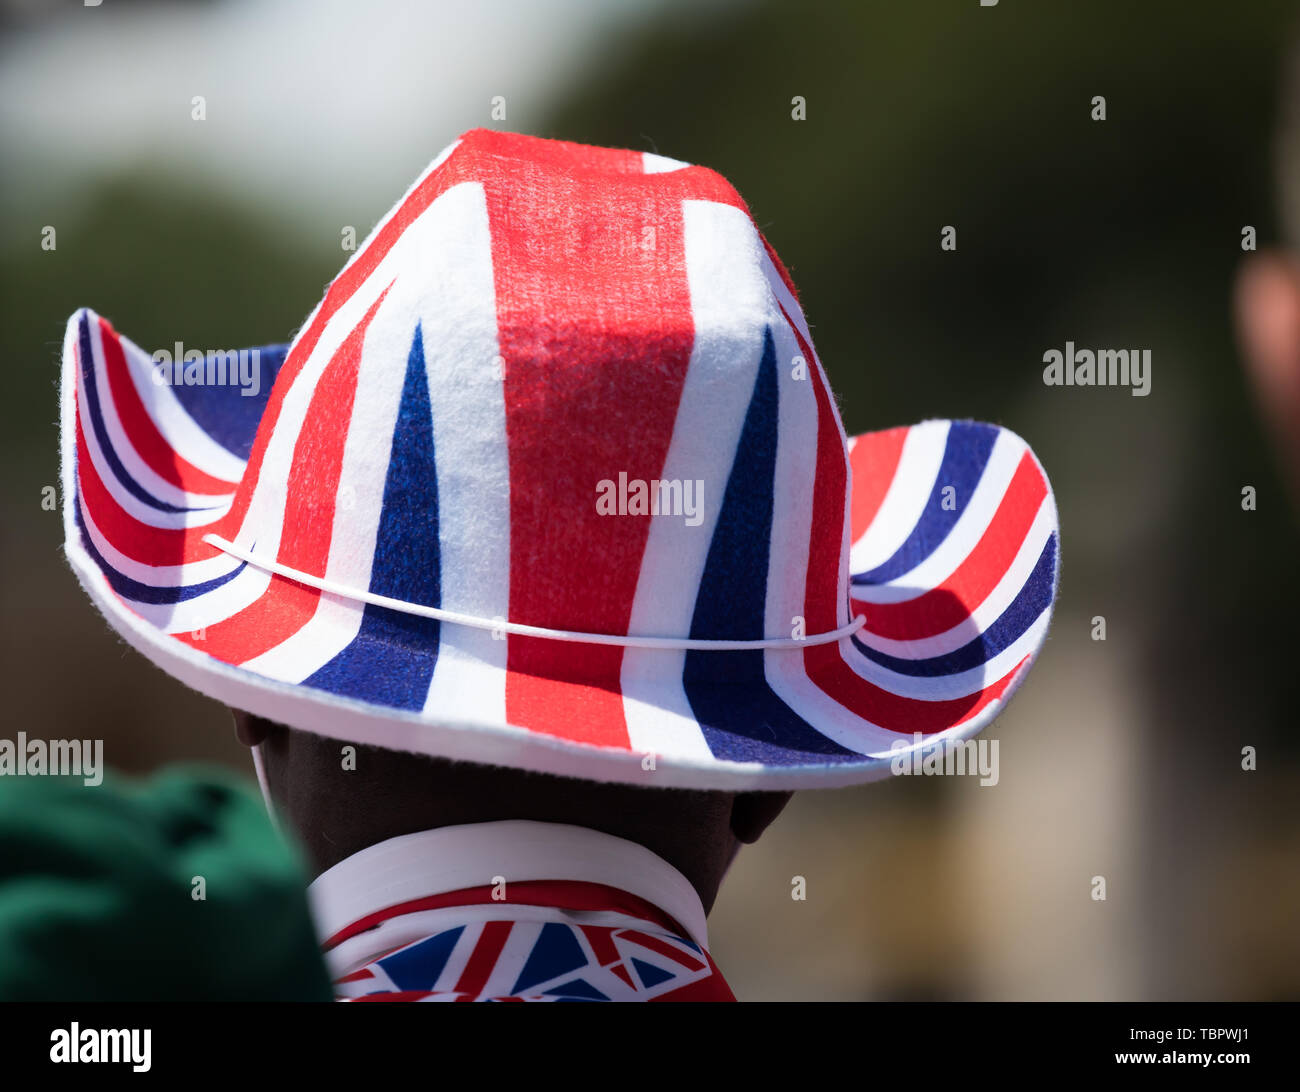 London, UK. 3rd June, 2019. President Trump and his wife Melania arrive at Buckingham Palace by Helicopter, Marine One, they were greeted by Prince Charles then The Queen at the start of his official state visit to Great Britain. A 41 gun salute was also carried out in his honour. Credit: Keith Larby/Alamy Live News Stock Photo